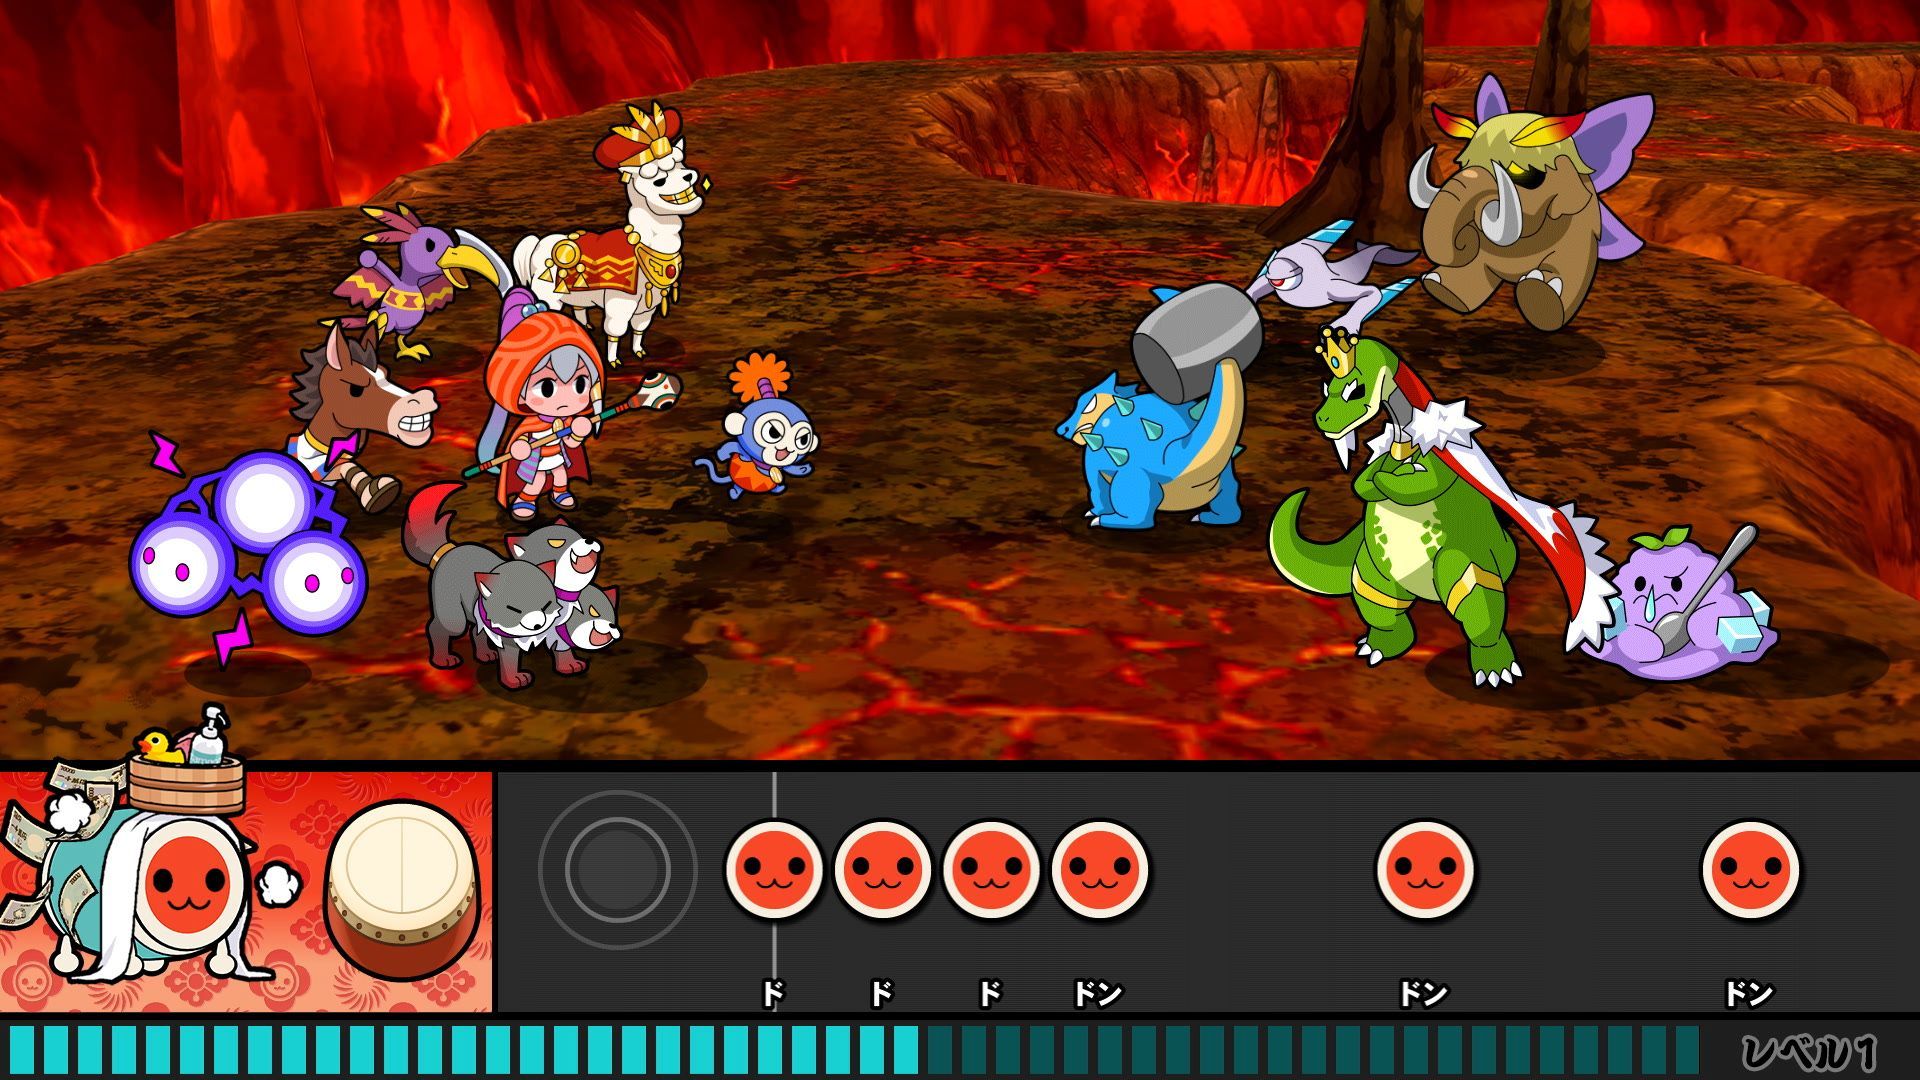 Don-chan, Tia, Popo Kaka, and a team of friends fight a monster horde inside a magma filled cavern in Taiko No Tatsujin: Rhythmic Adventure 2.